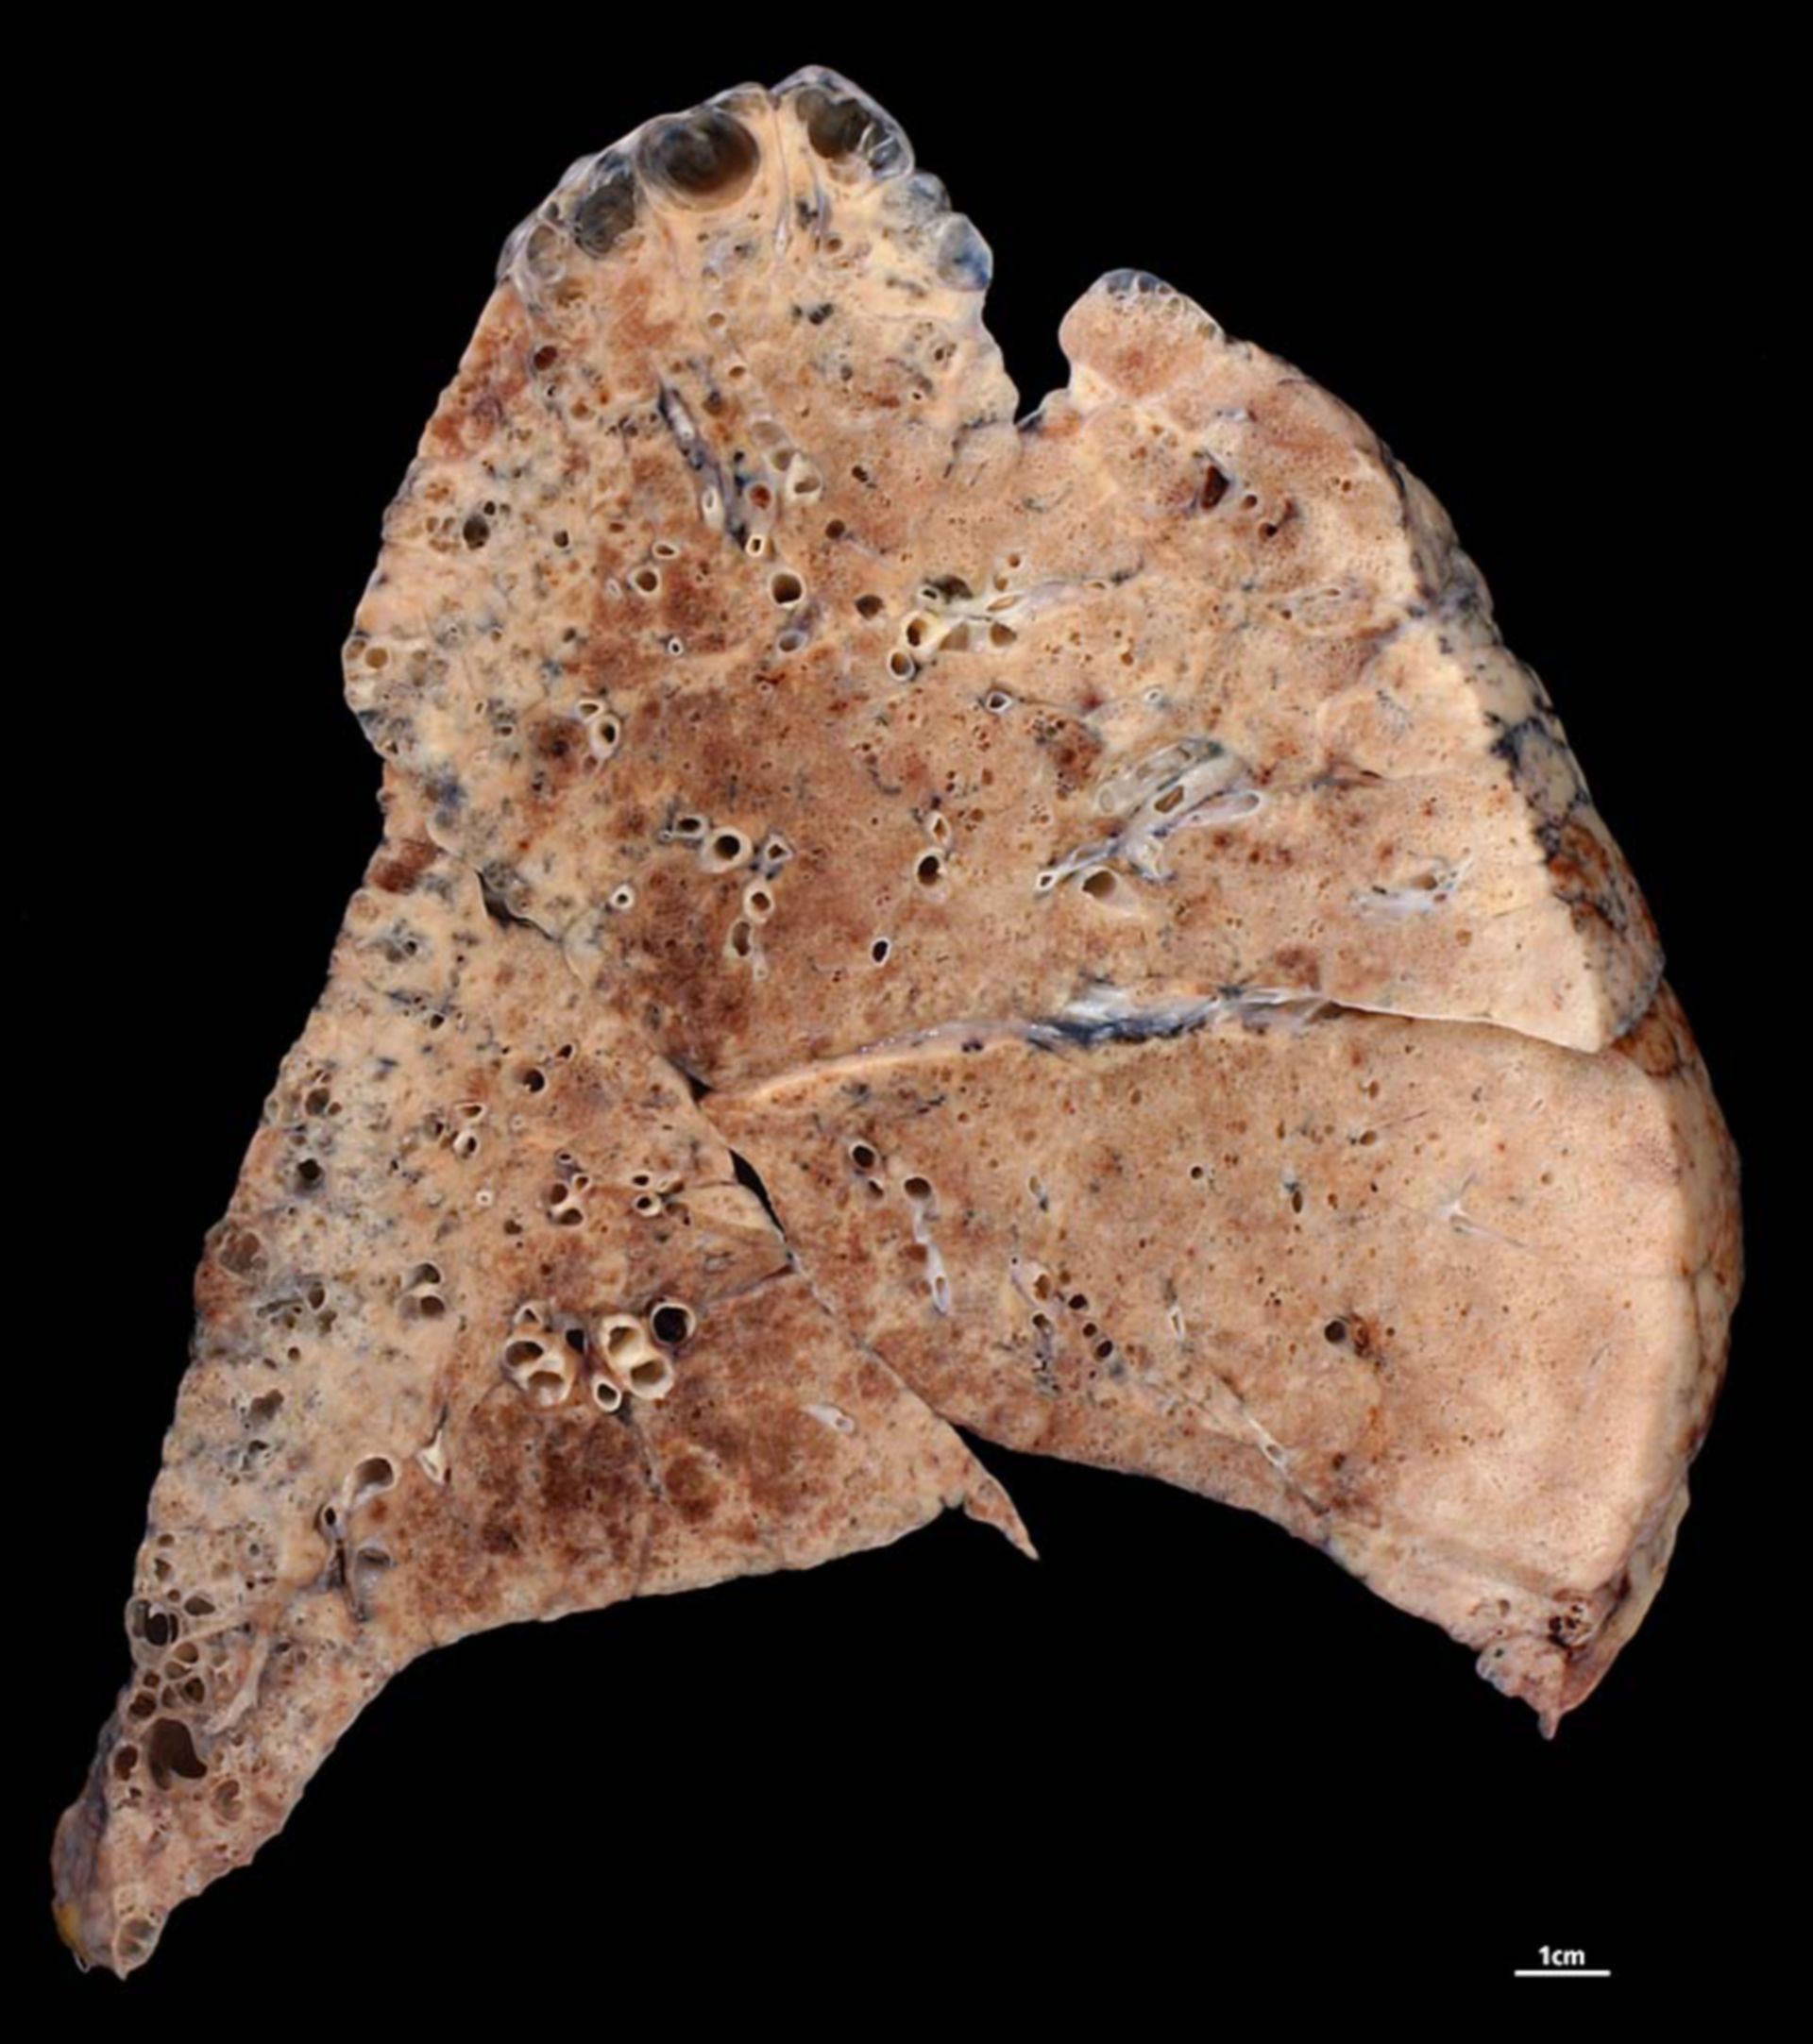 Lung fibrosis in a patient with rheumatoid arthritis